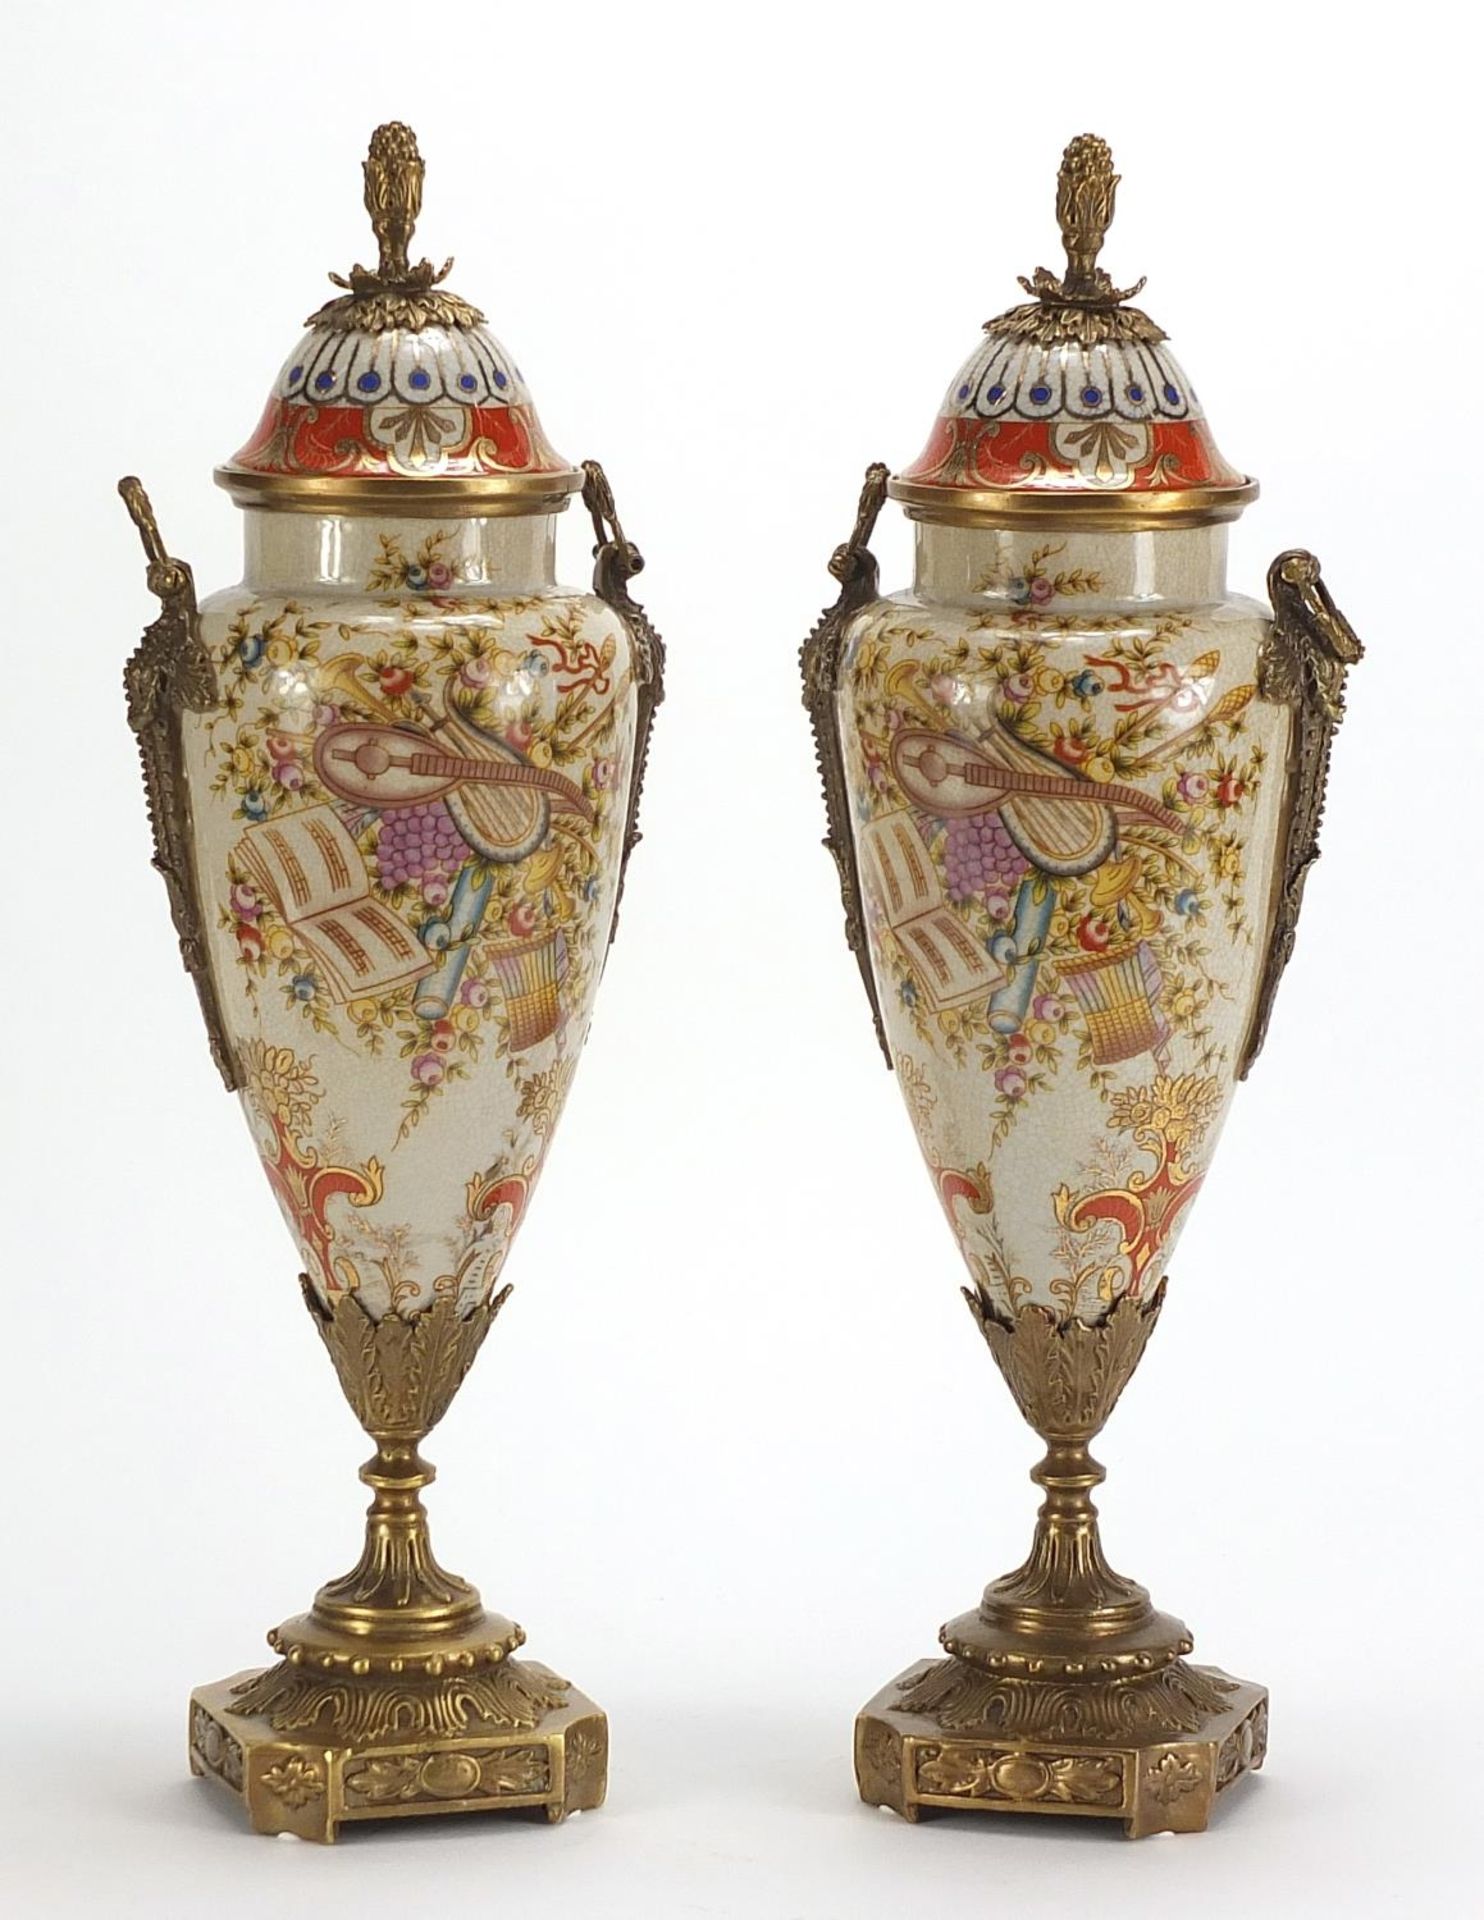 Pair of Continental vases and covers with bronze mounts, each decorated with instruments and